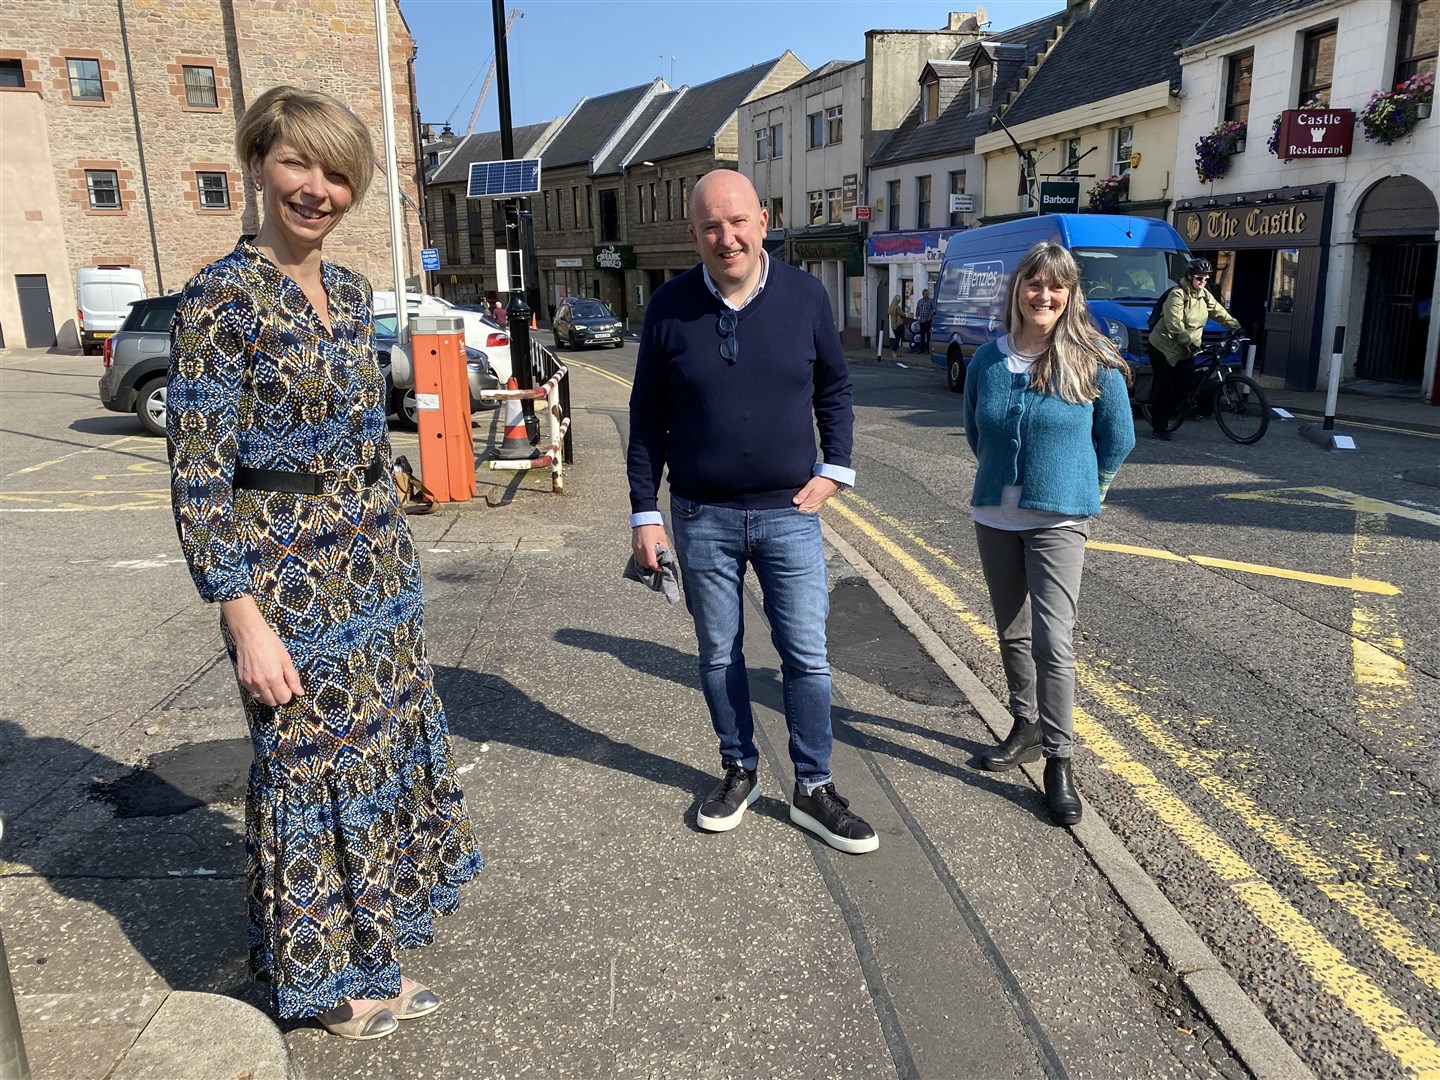 From left, Tania Kennedy from Rouge Boutiques, Norman MacDonald of Cafe One and Denise Collins of Castle Gallery, in Castle Street, which will be returned to two-way traffic by the end of the year.